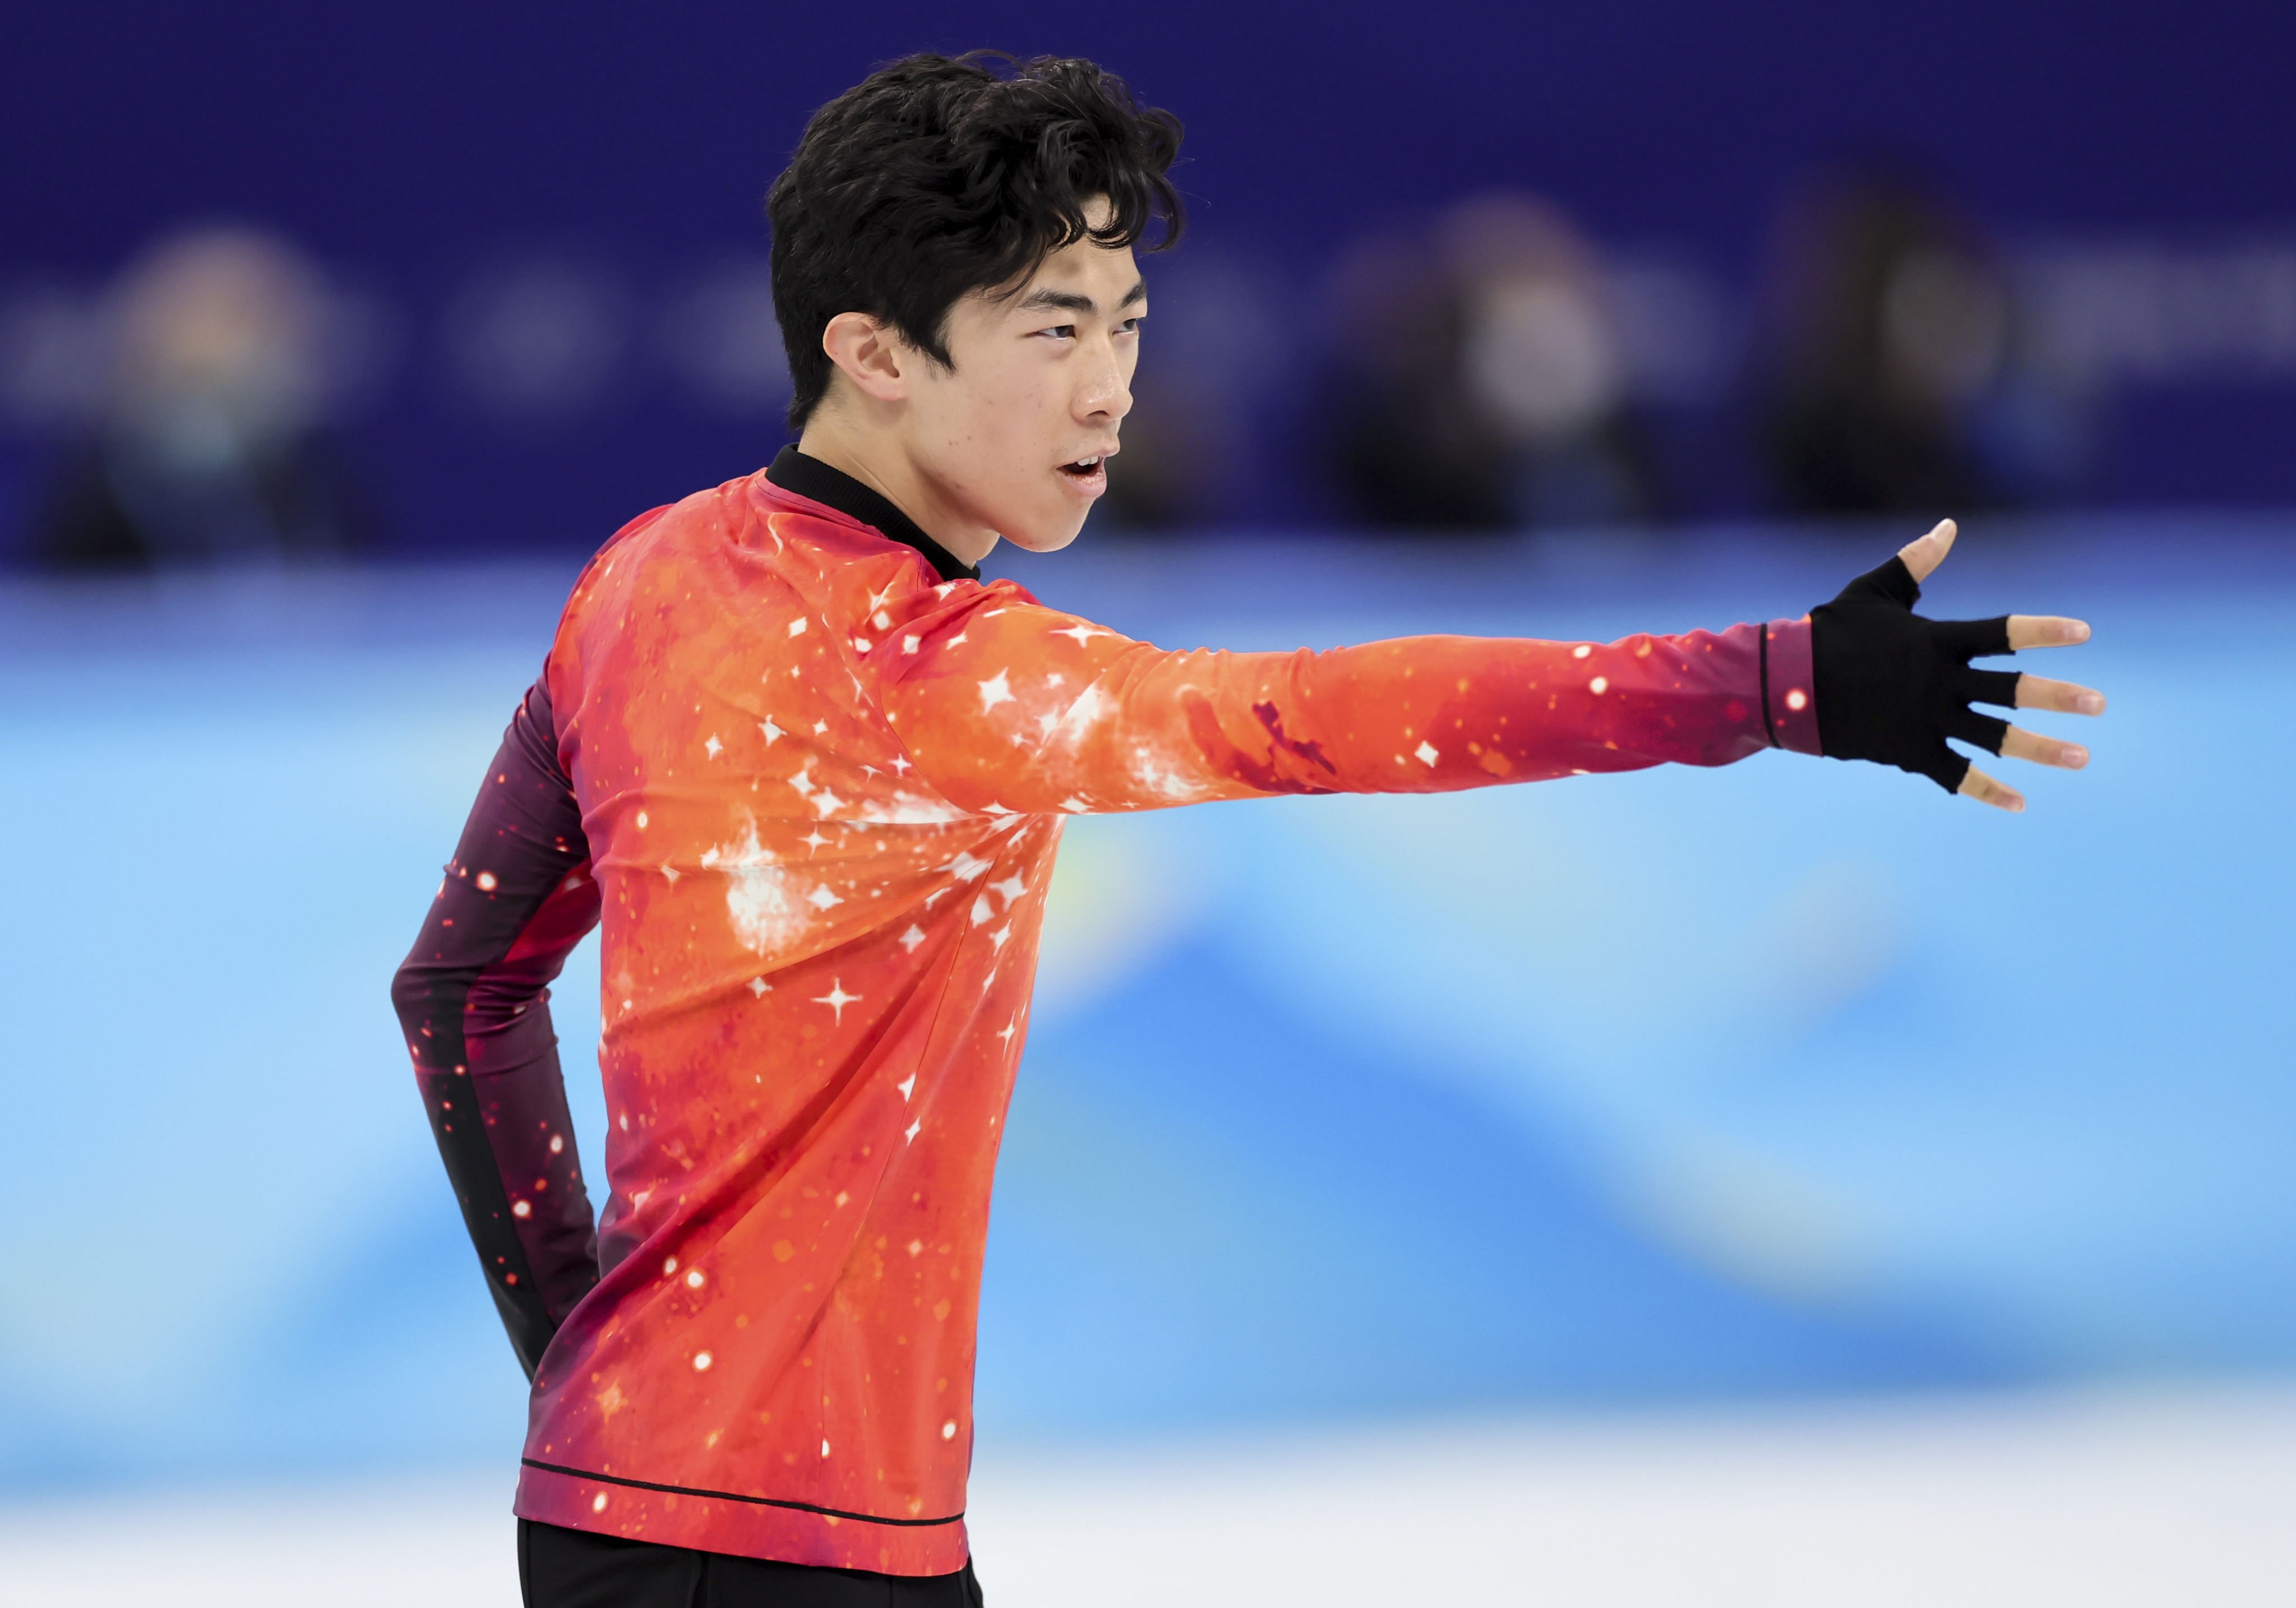 American Nathan Chen goes through his routine on his way to gold in the men’s figure skating. Photo: Xinhua